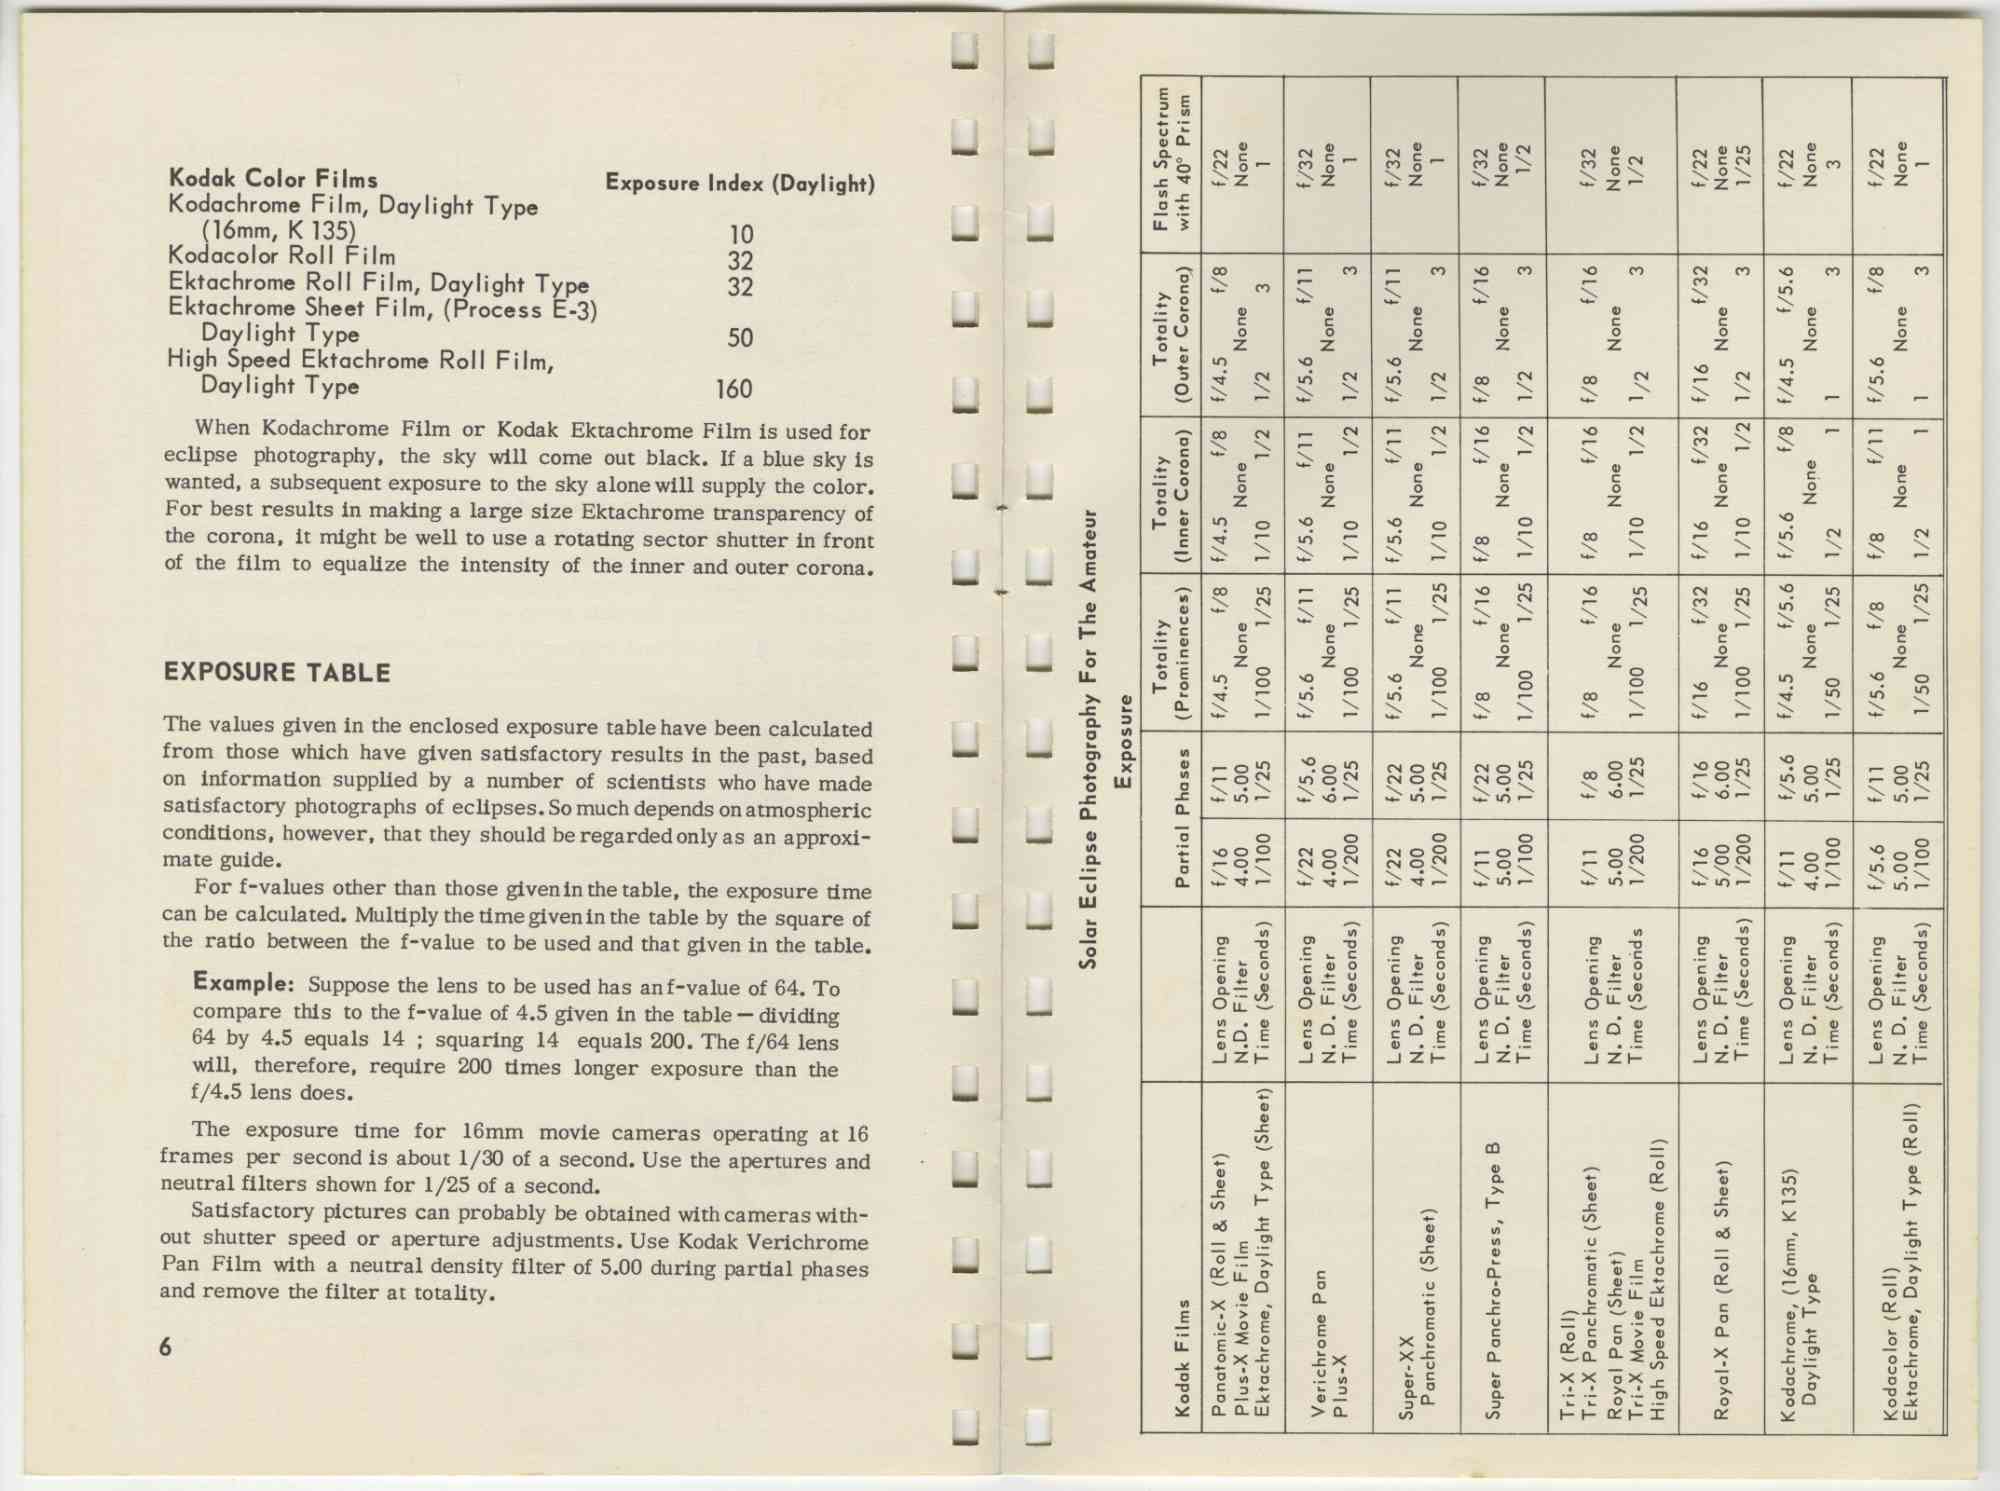 An interior spread from a solar eclipse photography guide created by the Eastman Kodak Company provides an exposure table and explanation about exposure times.